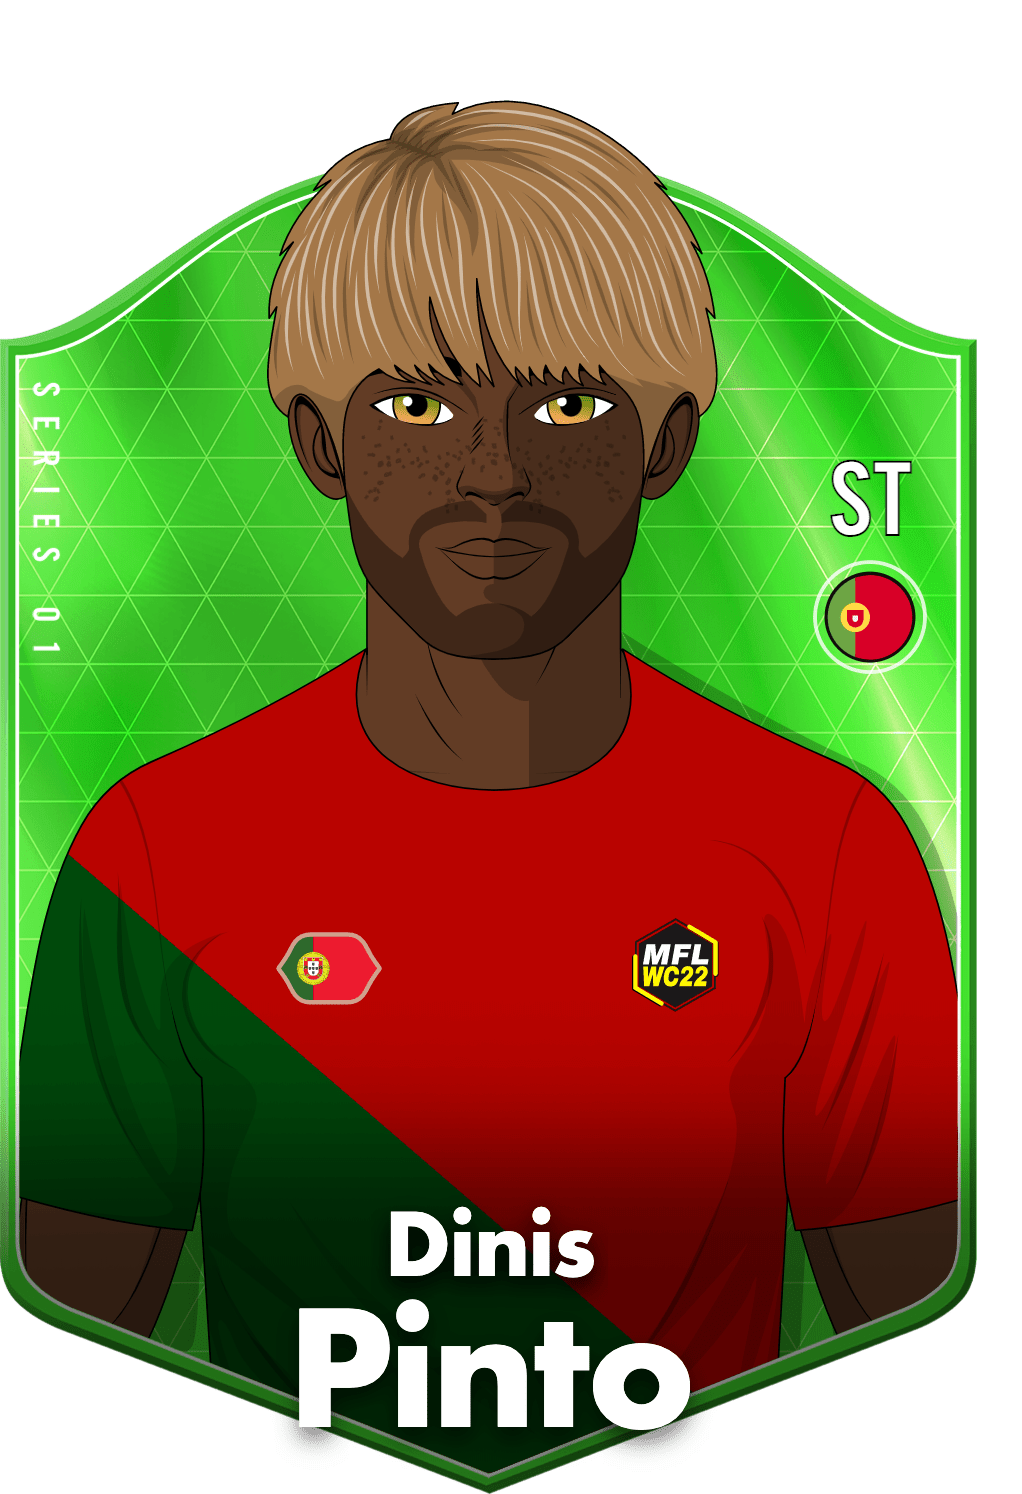 Dinis Pinto asset